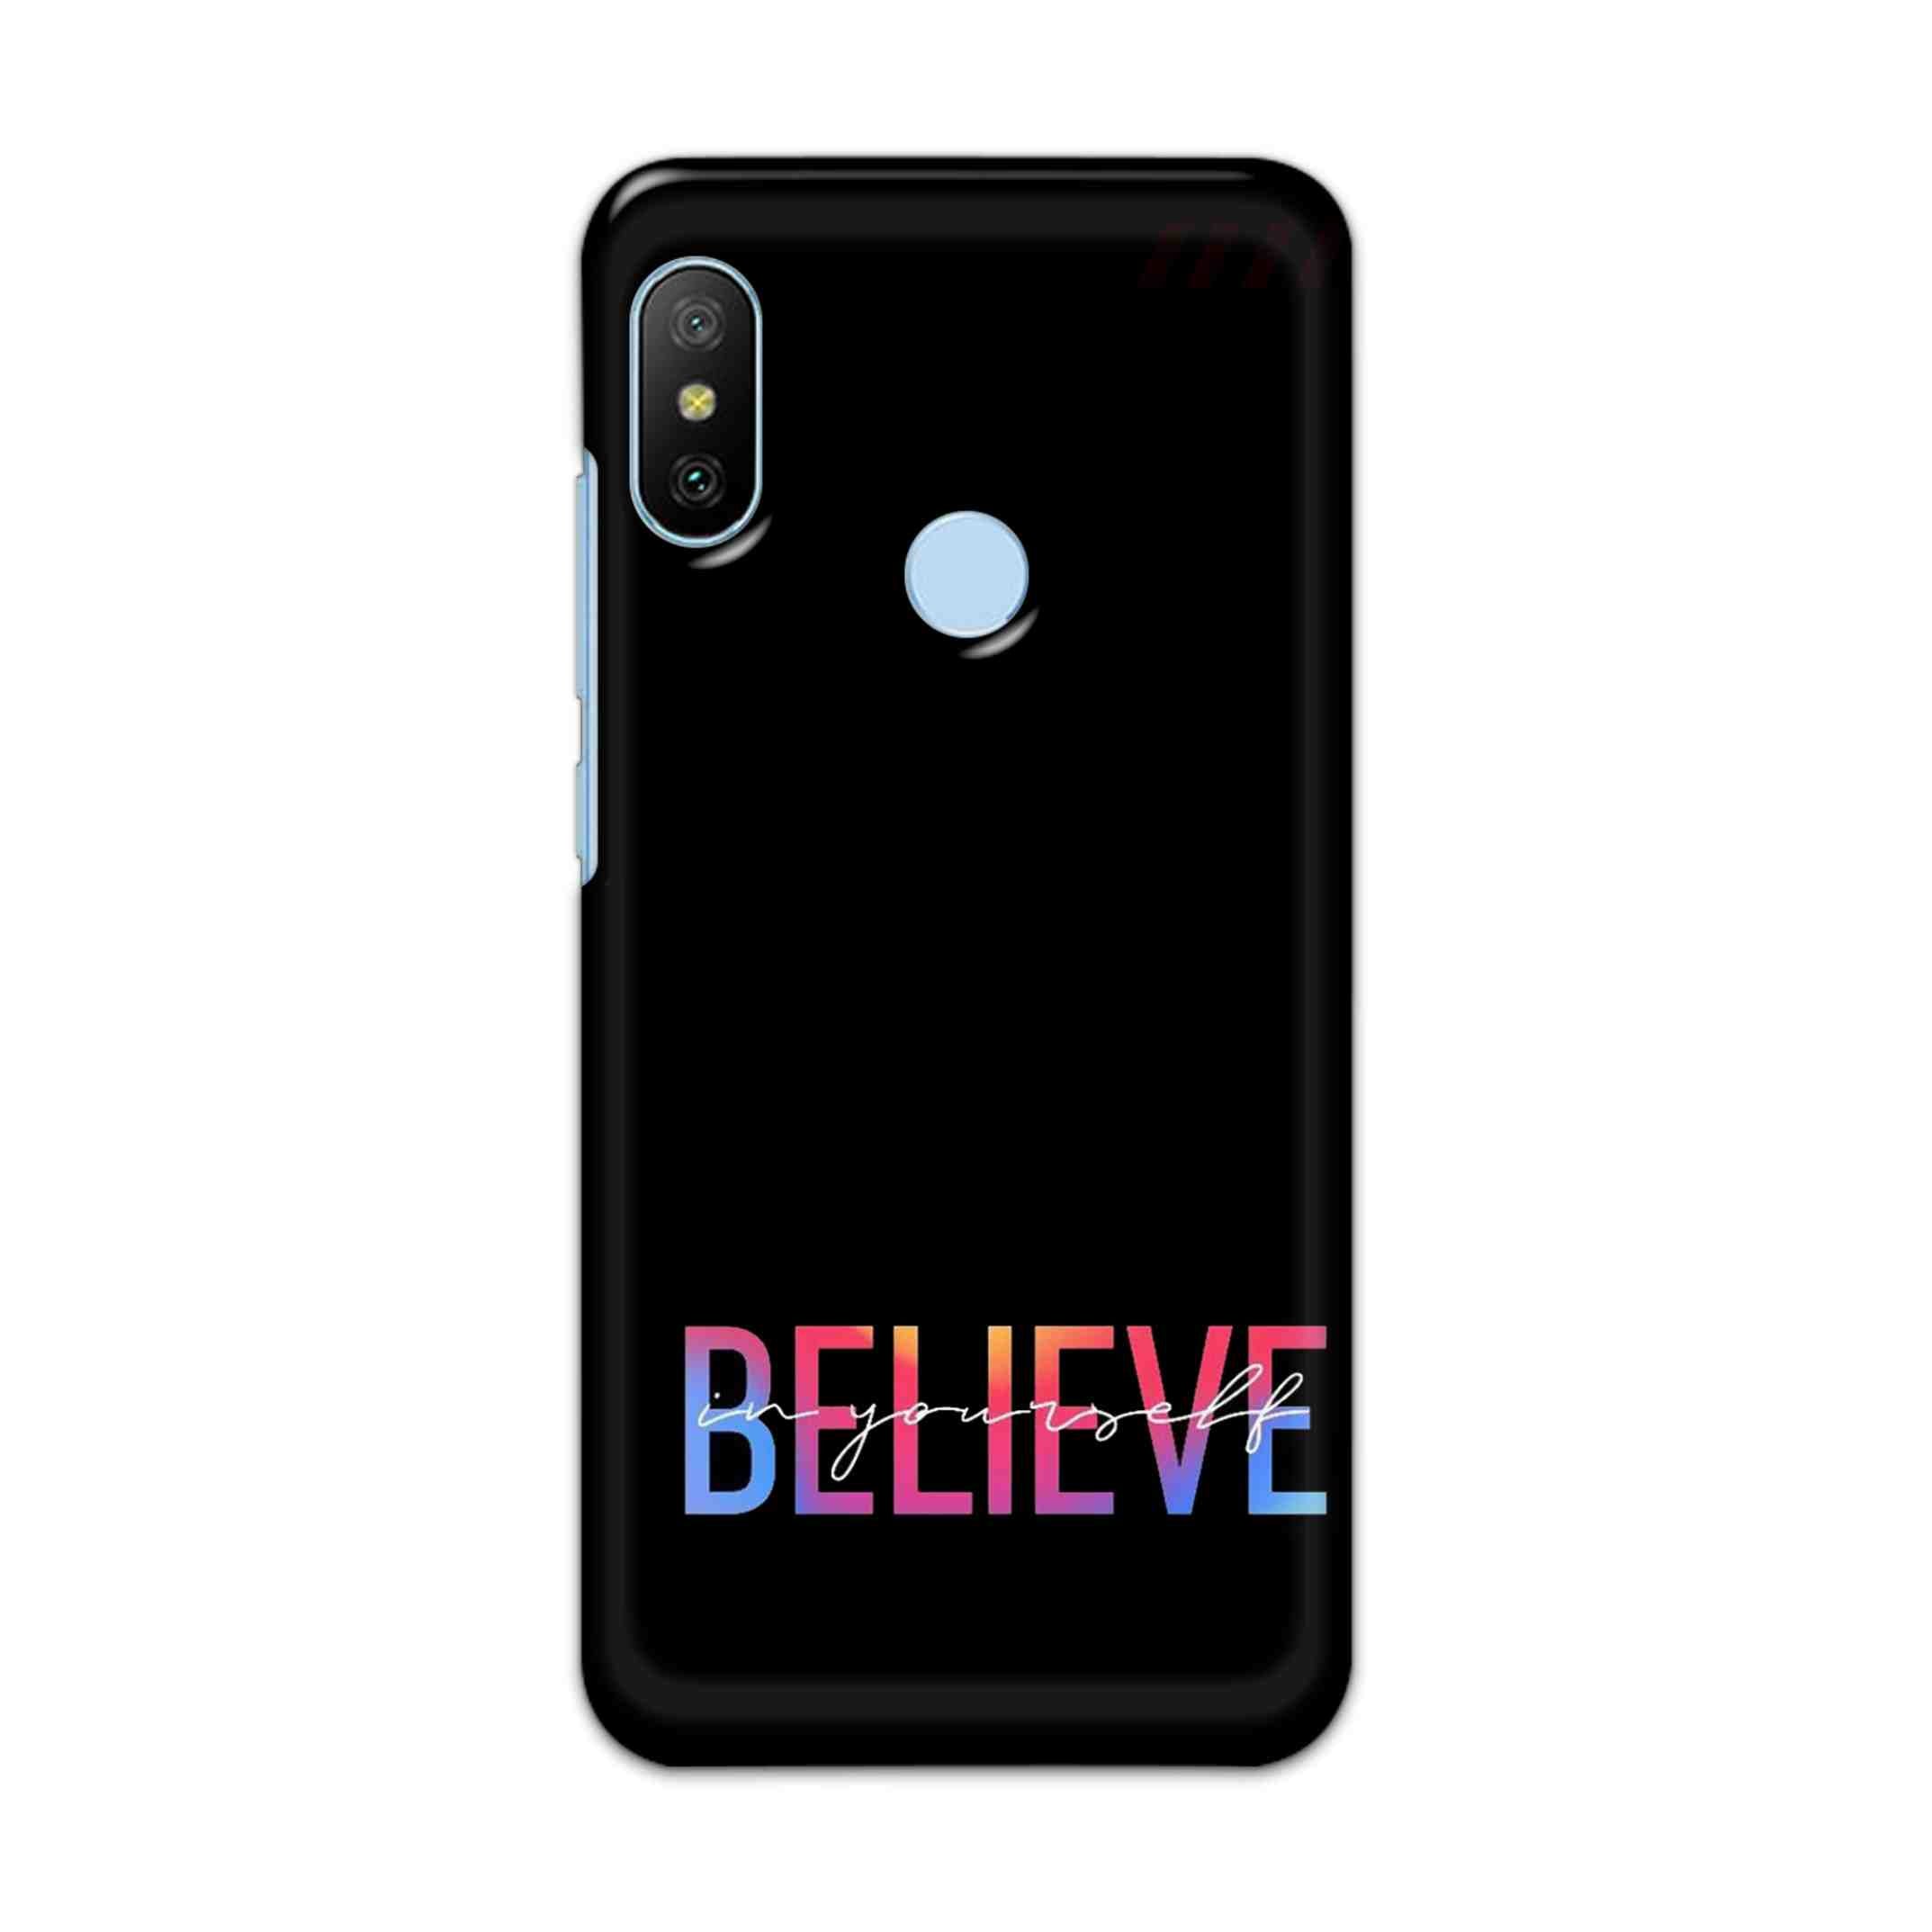 Buy Believe Hard Back Mobile Phone Case/Cover For Xiaomi Redmi 6 Pro Online